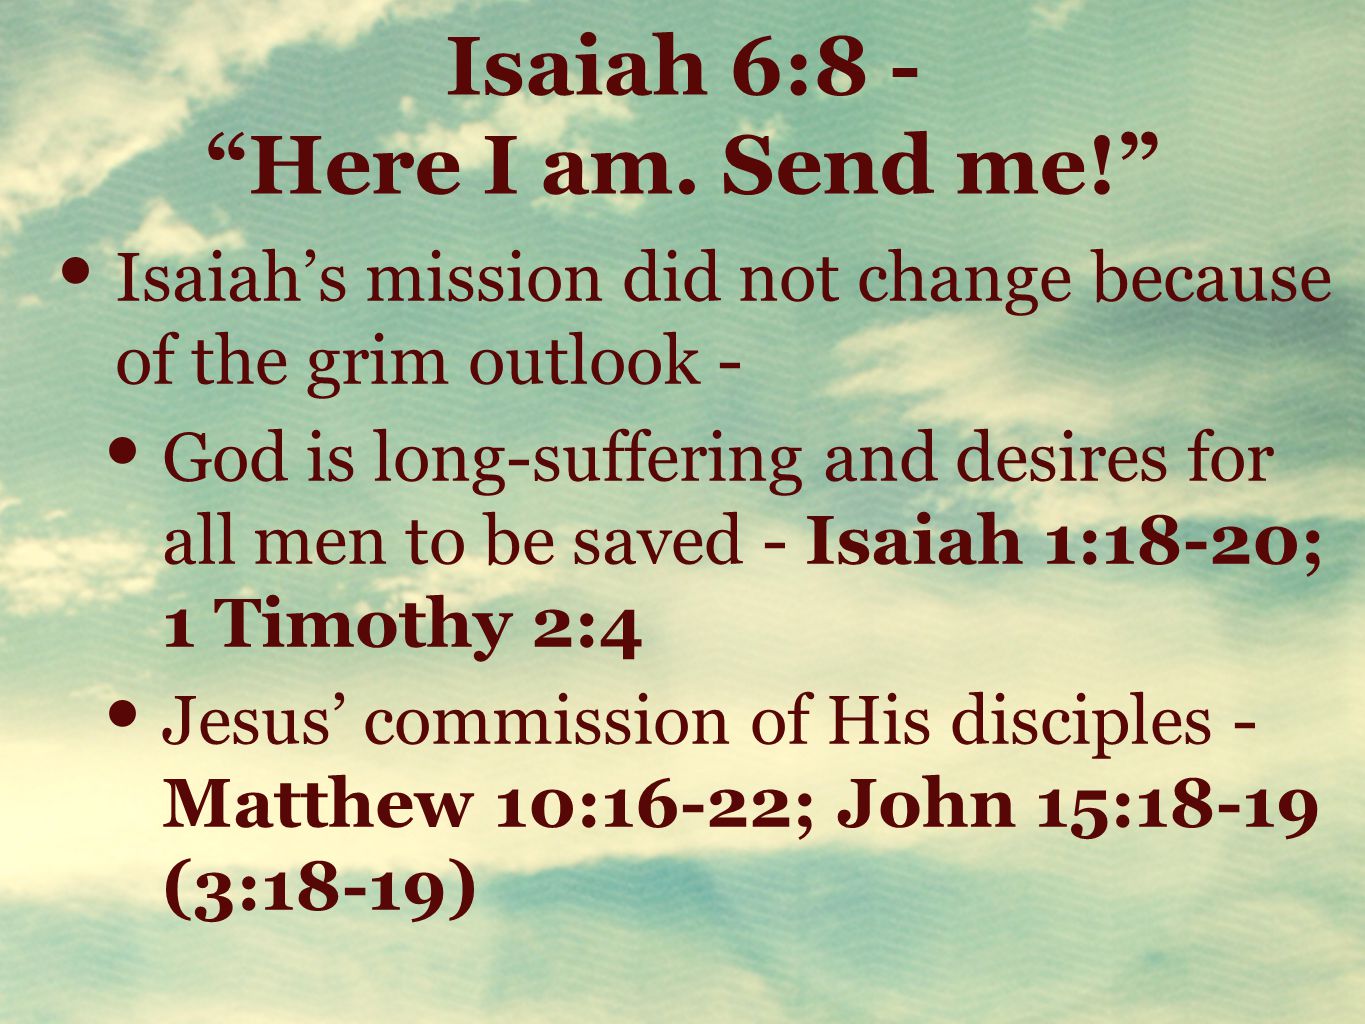 Isaiah 6:8 - Here I am. Send me!